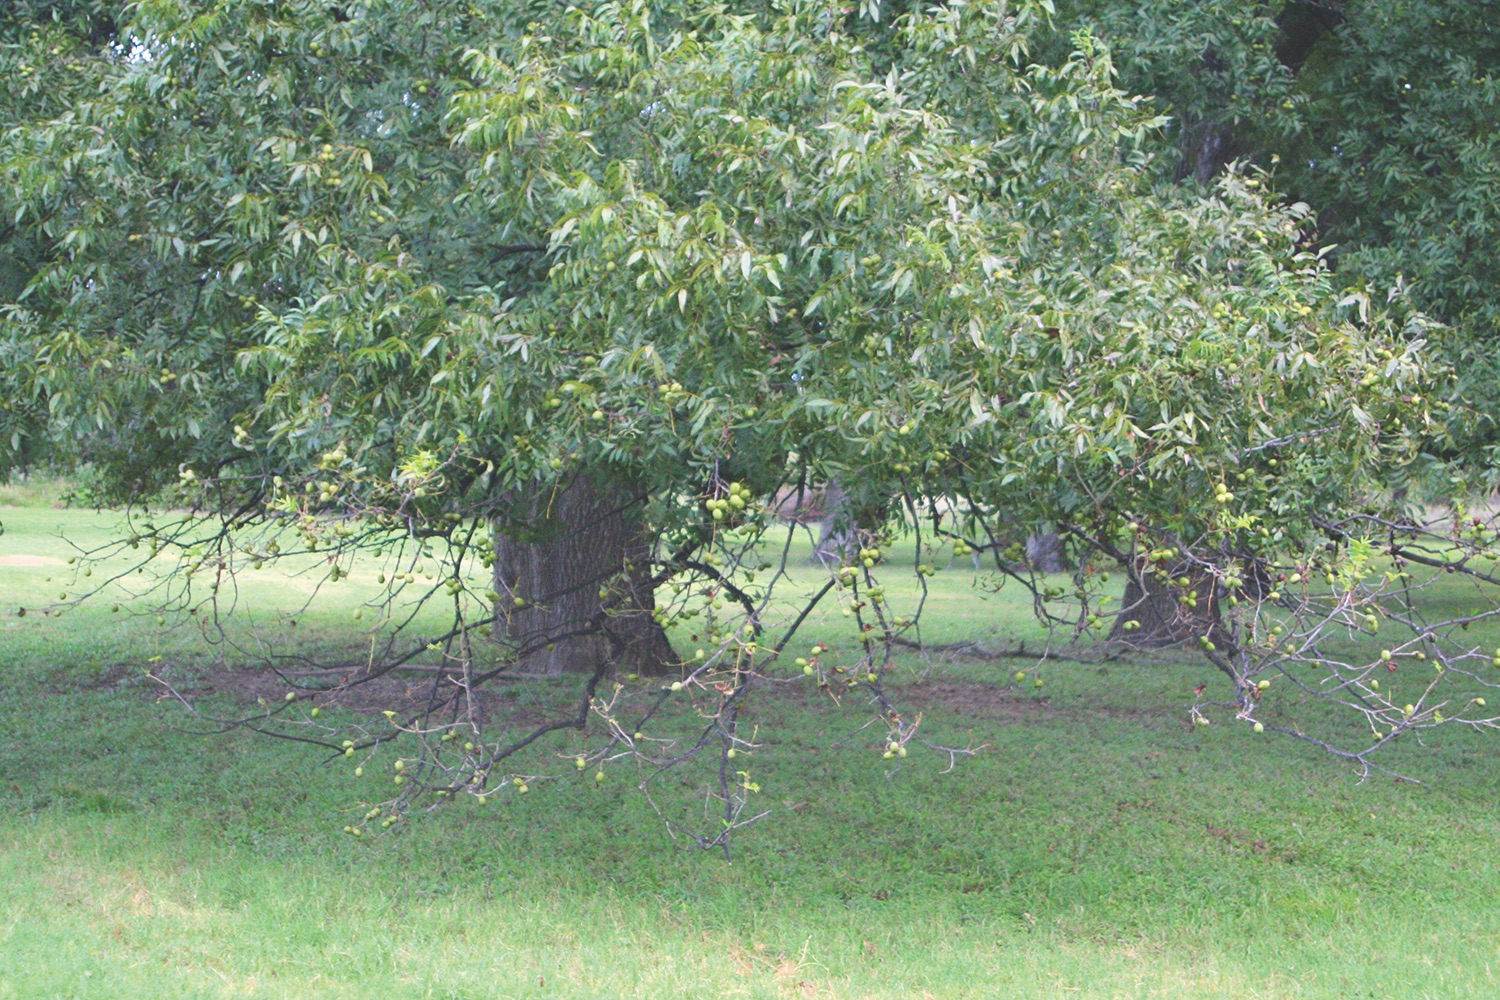 A native pecan tree has lost leaves at the ends of its low hanging branches after a long drought.